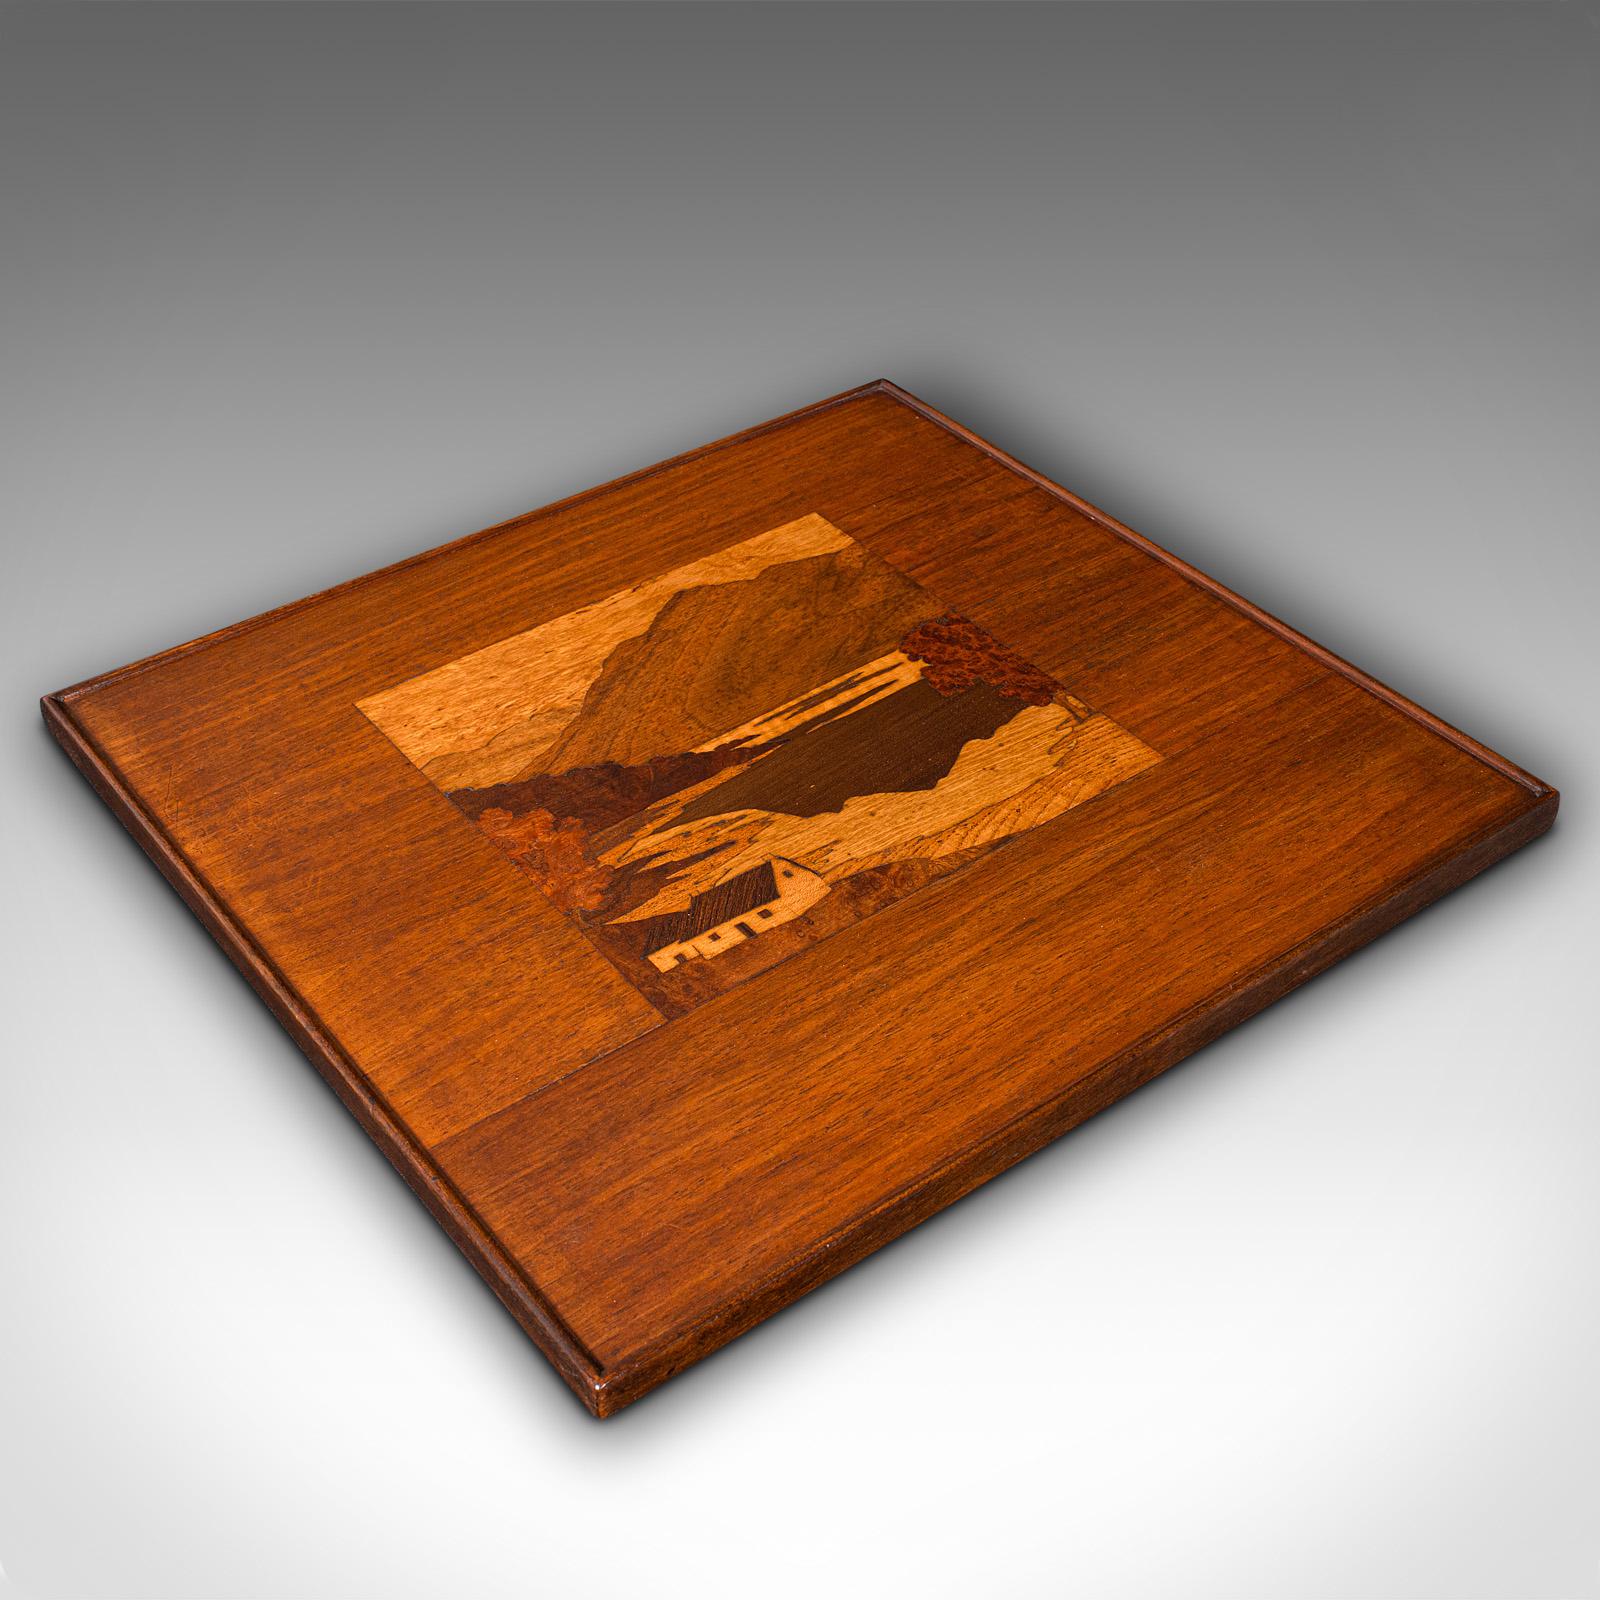 Early 20th Century Antique Marquetry Landscape Panel, English, Decorative, Ben Lomond, Edwardian For Sale